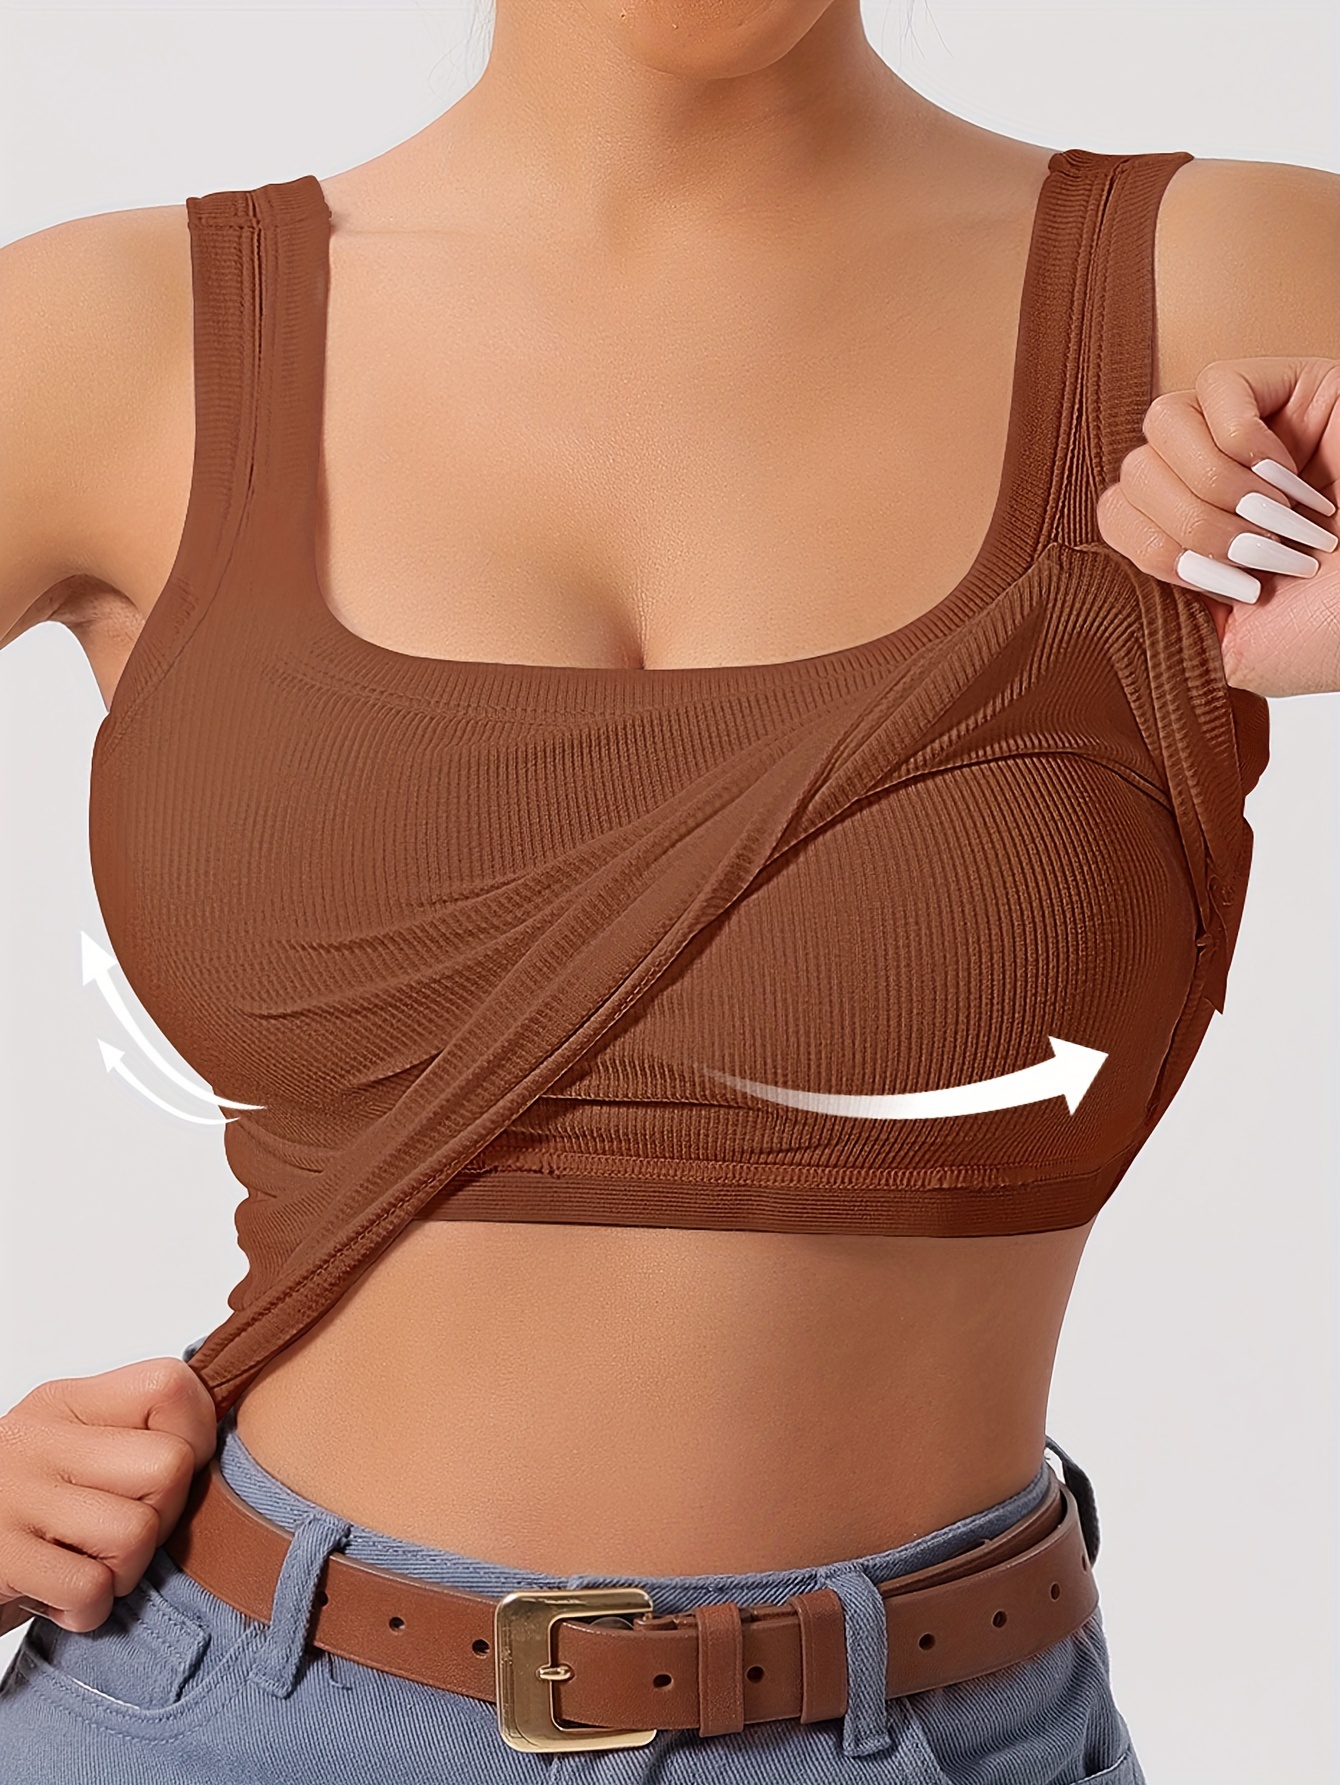 Convertible Bra, Women Sleeveless Casual Printing Vest Chest Pad Short Tank  Tops, Halter Tops for Women with Built in Bra